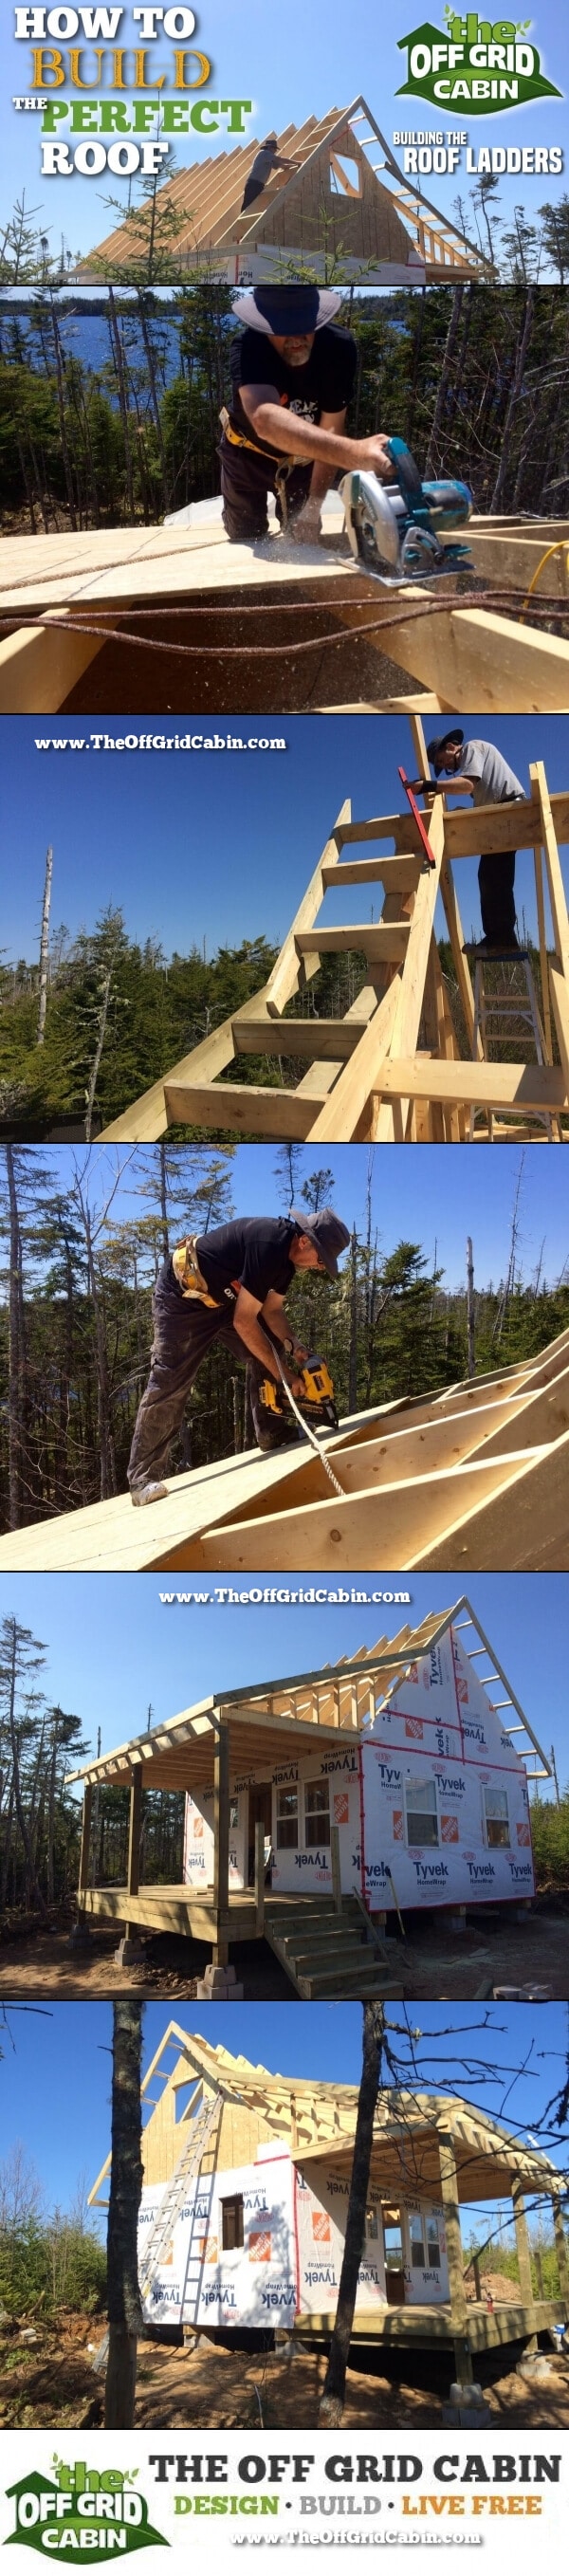 The Off Grid Cabin How To Build The Perfect Roof Rake Ladder Pinterest Image